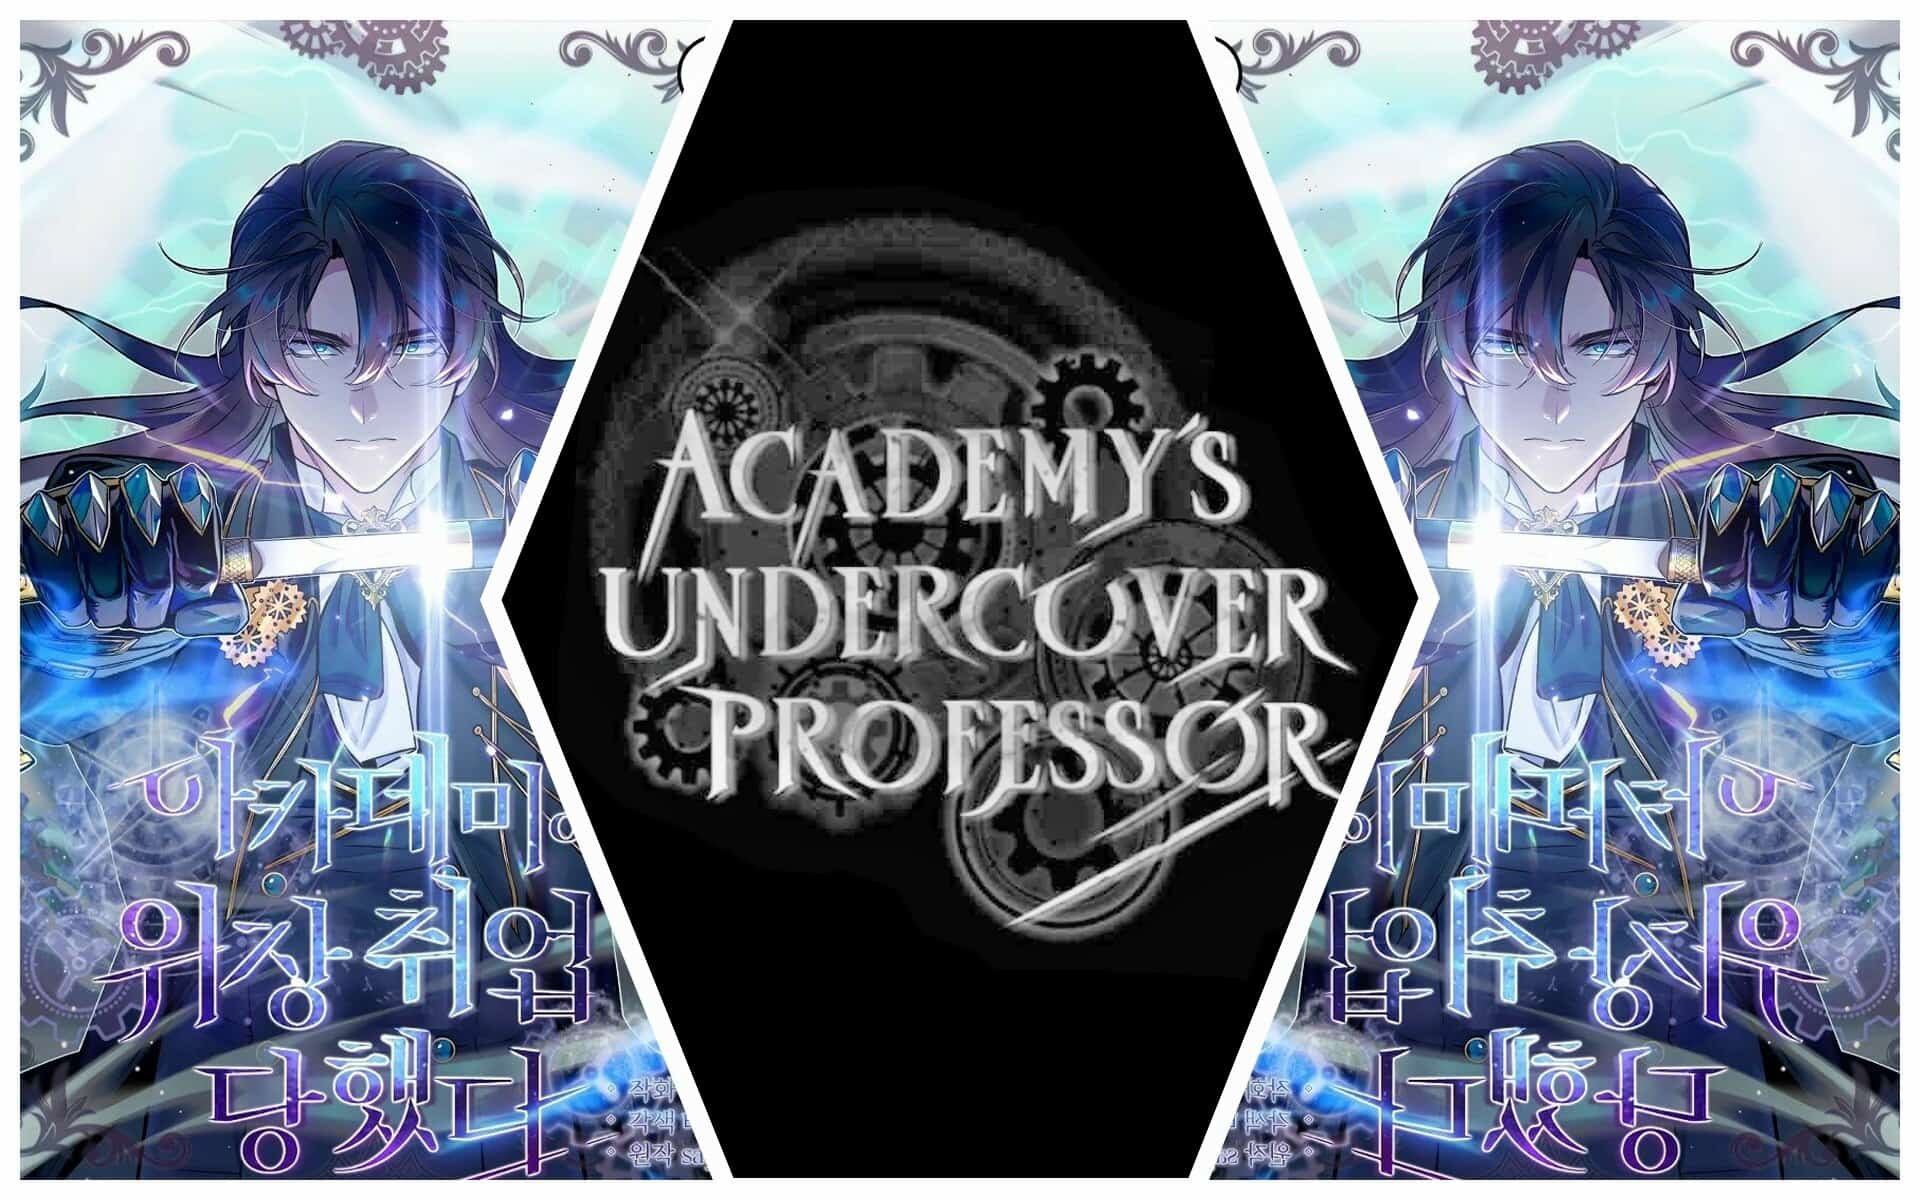 Academy's undercover professor cover page